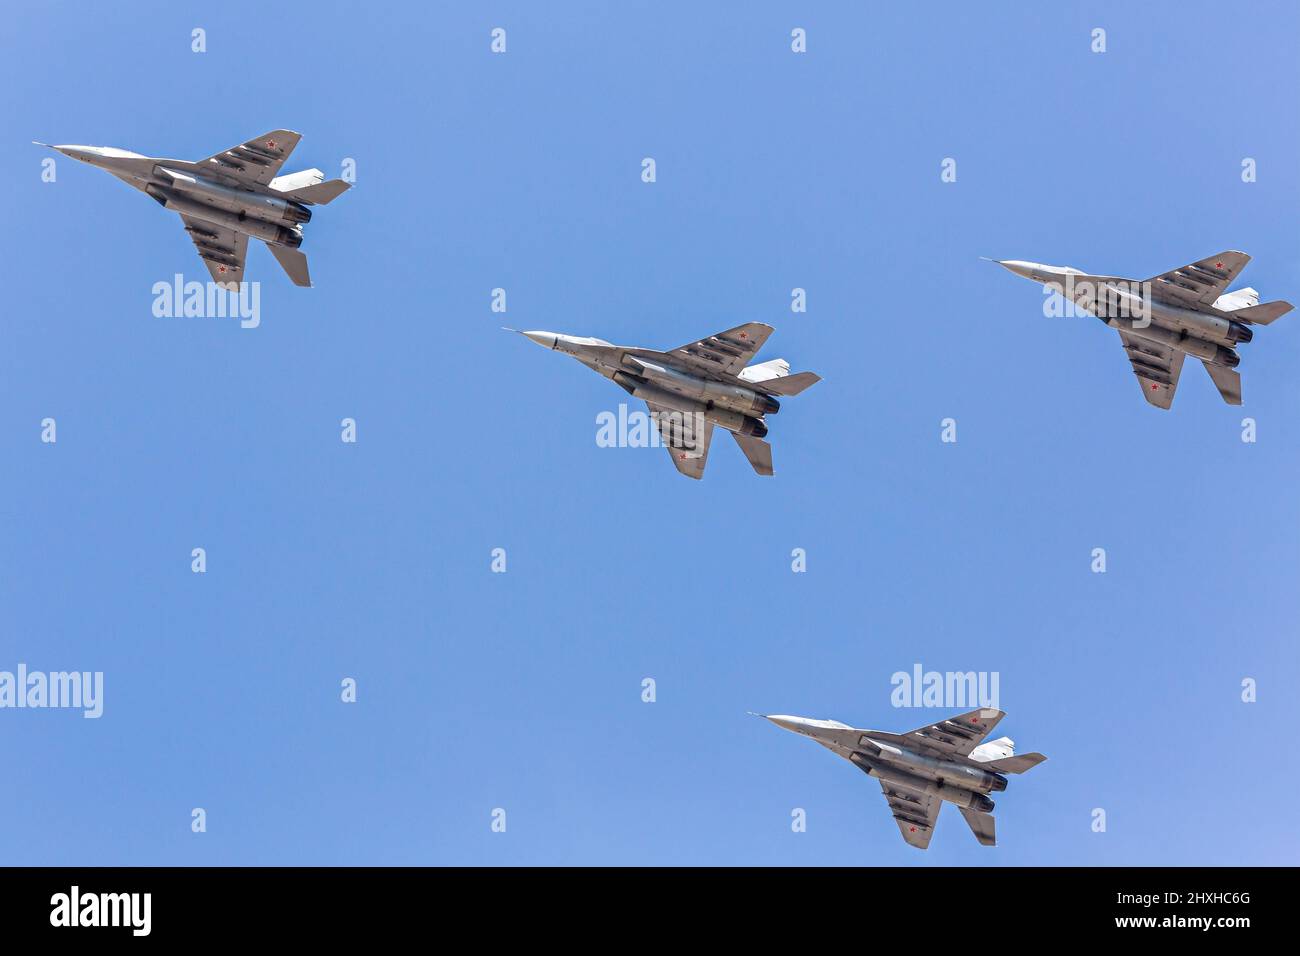 combat fighter jet on a military mission. attack aircrafts flying on blue sky background. Stock Photo